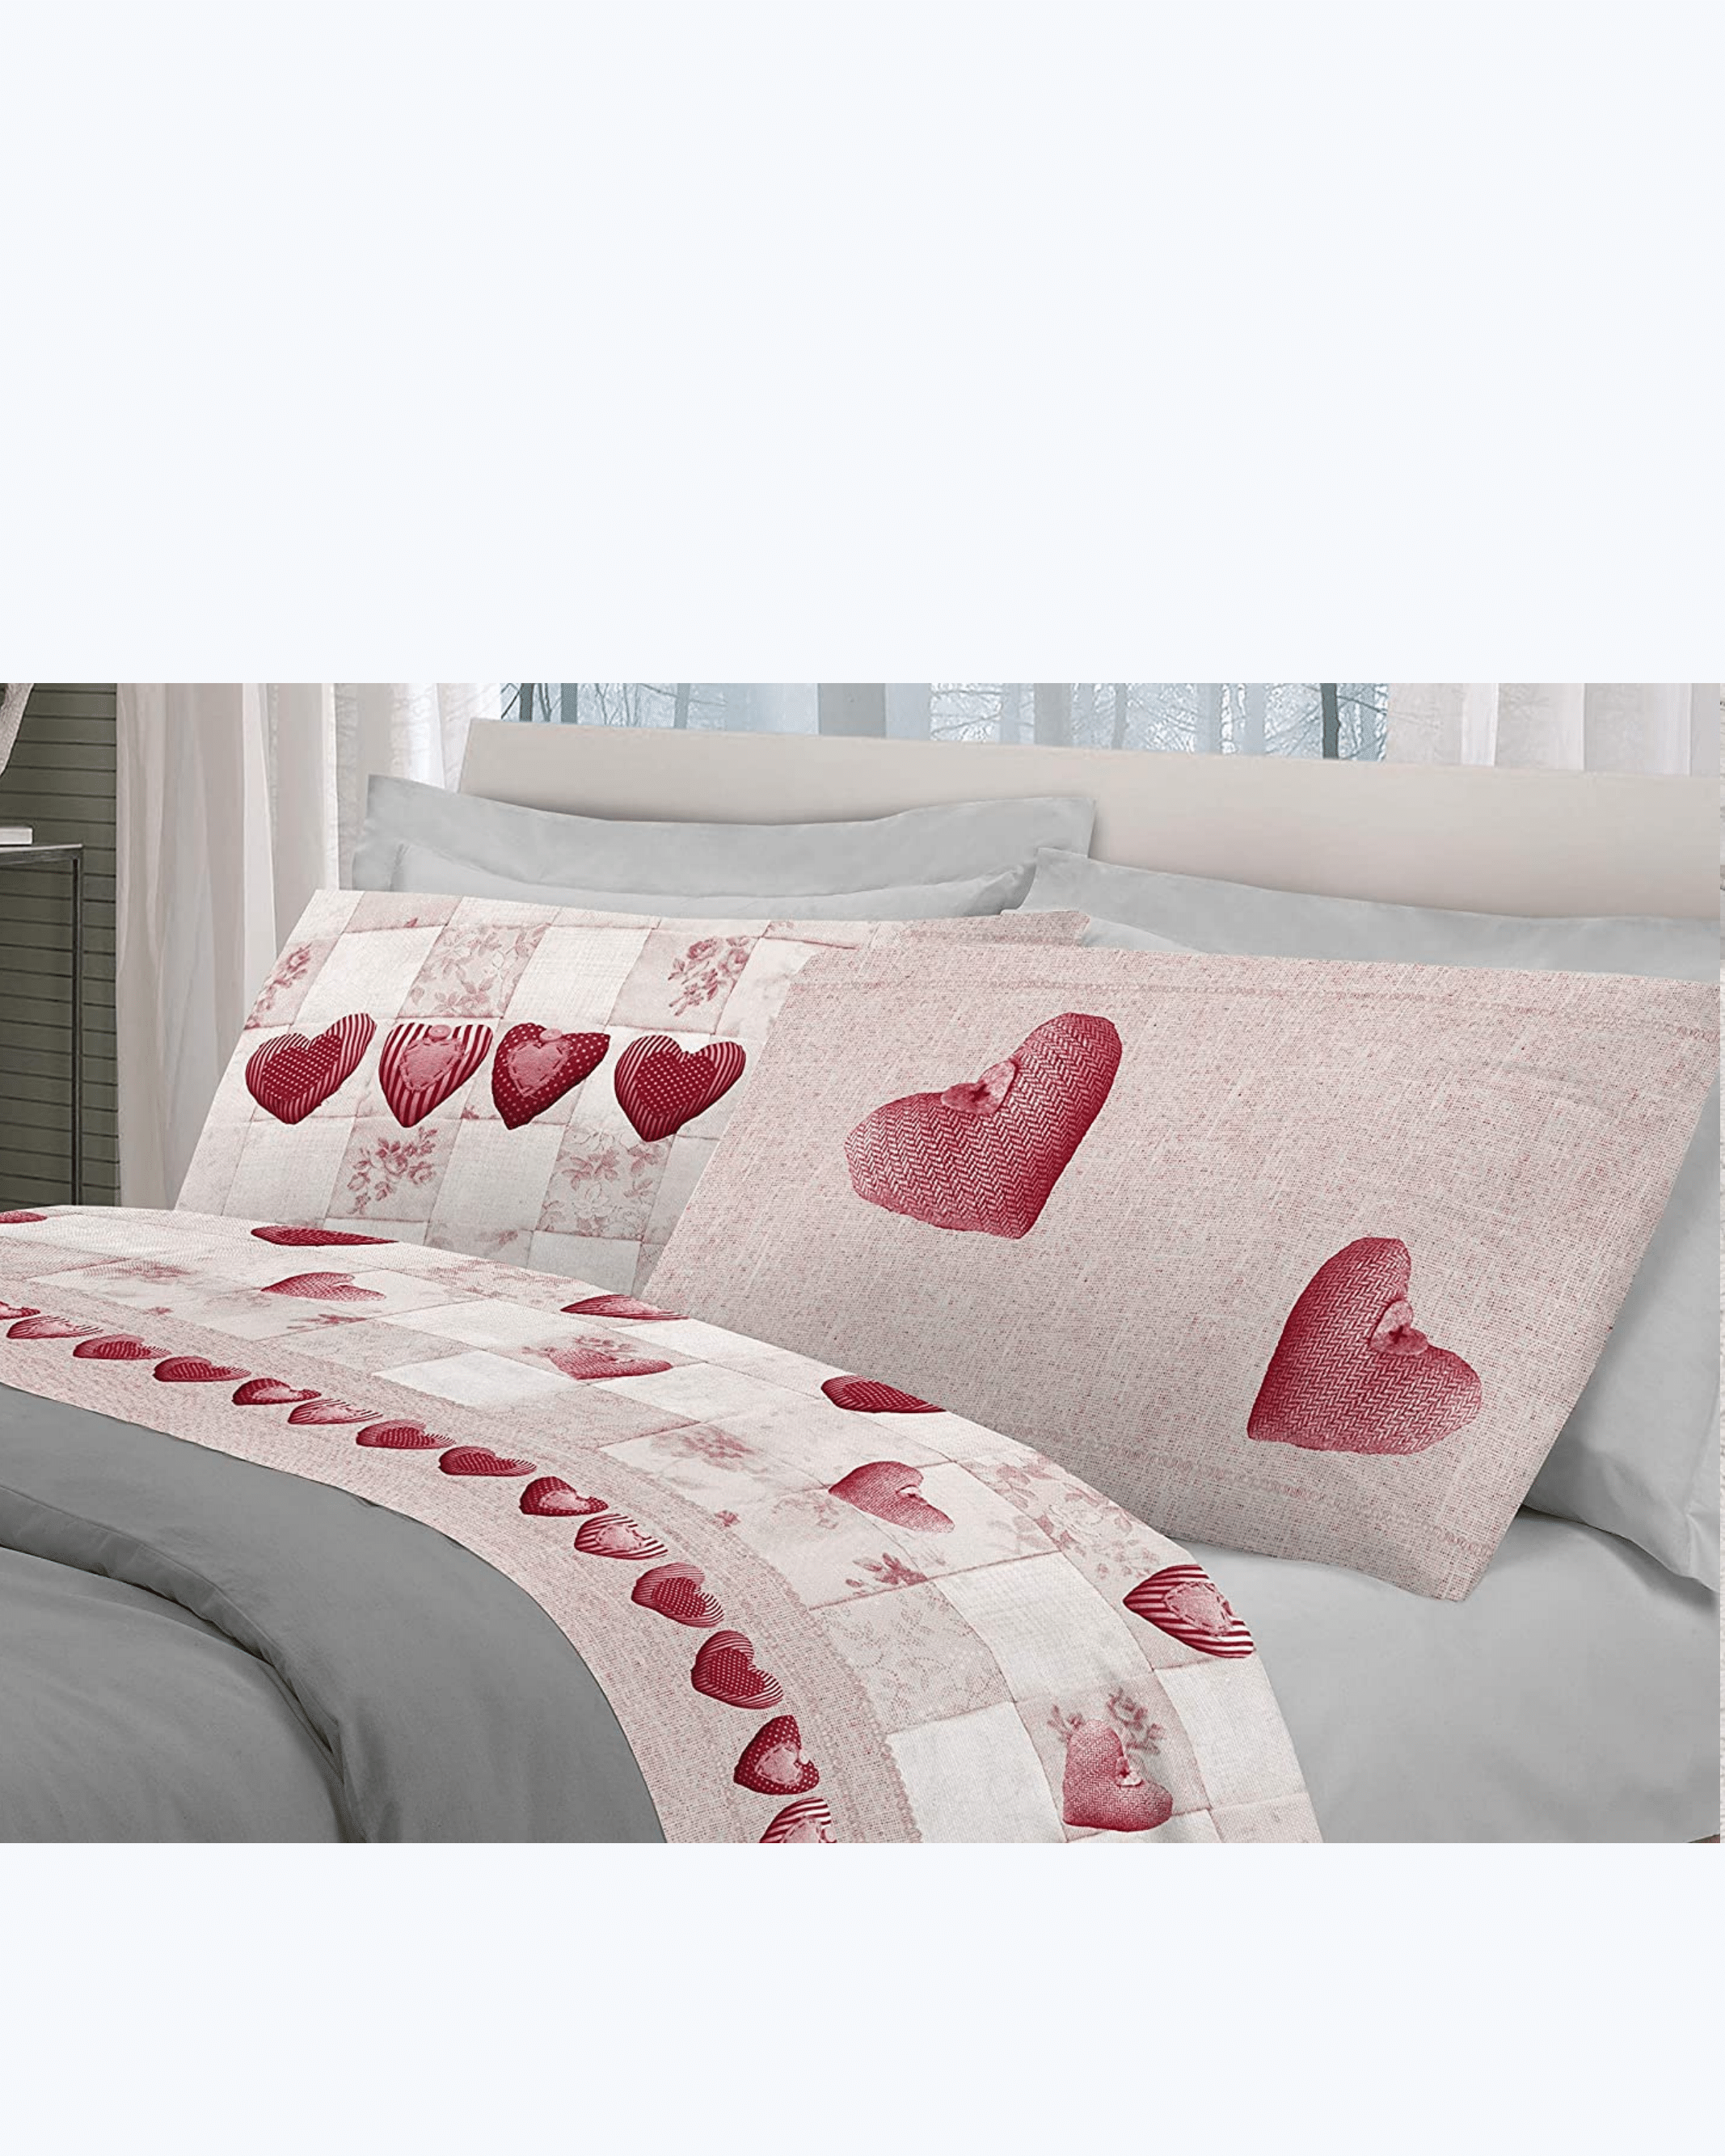 Set Lenzuola Letto in Cotone Made in Italy - Completo Letto Stampa Patchwork